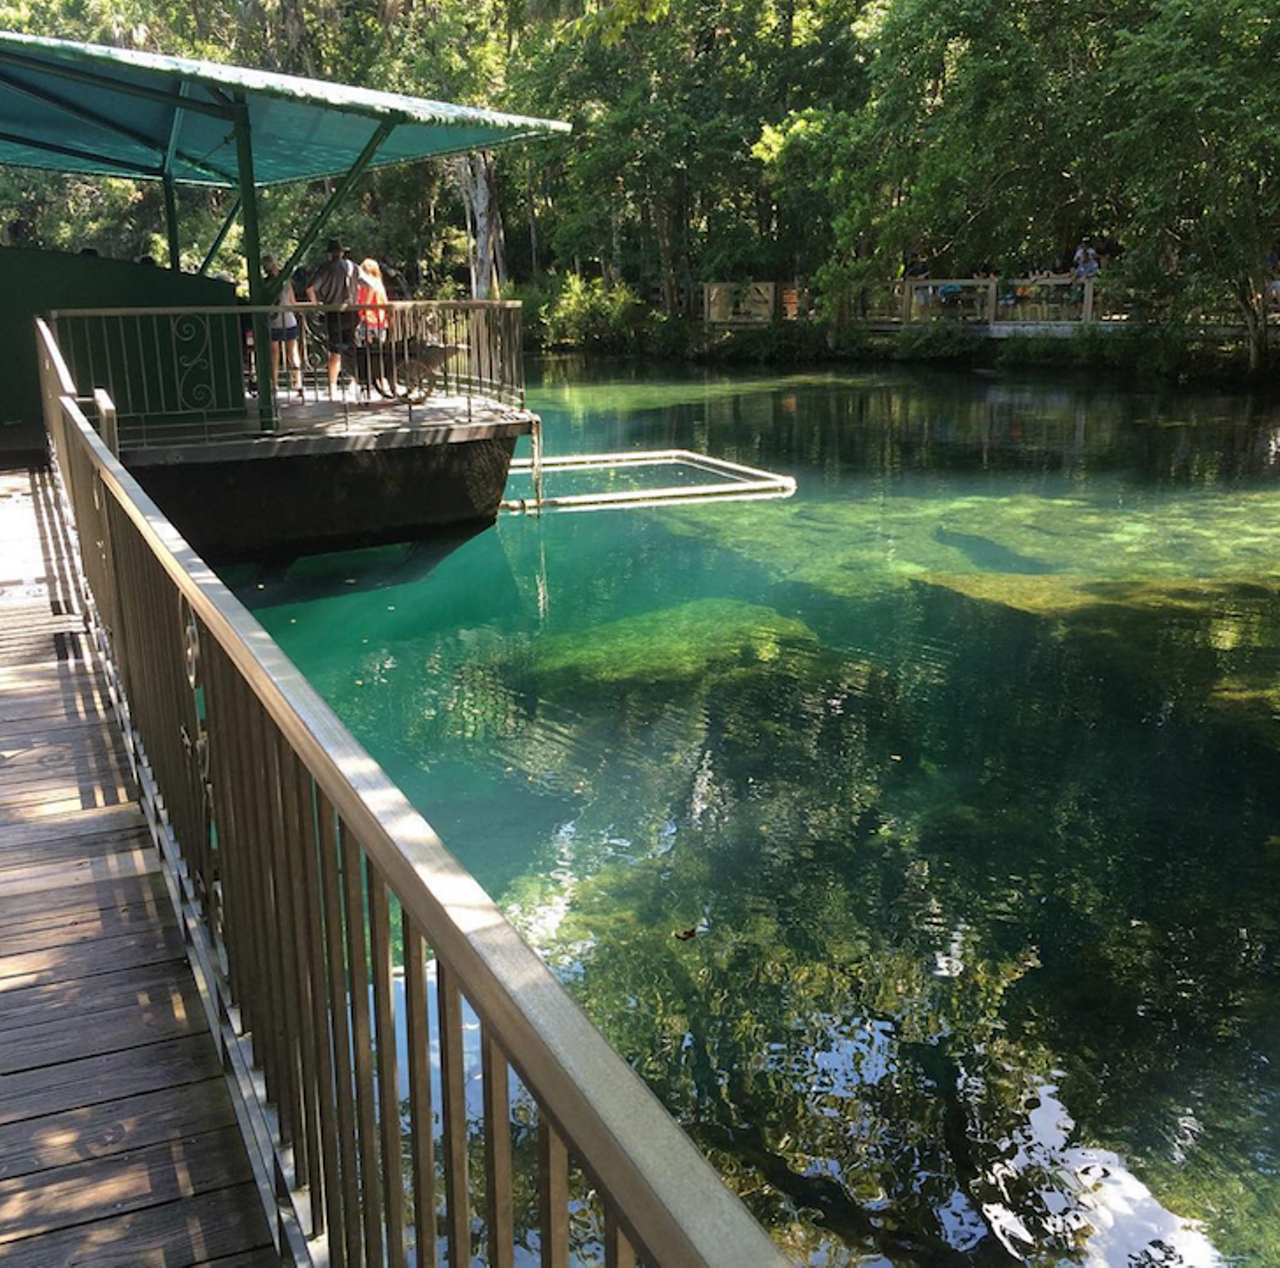 Homosassa Springs
Estimated driving distance from Orlando: 1 hour 32 min.
Visitors are able to see manatees at any time in the year from the park's underwater observatory. The park also showcases native Florida wildlife, including manatees, black bears, and bobcats. Manatee programs are offered three times daily. Camping is available nearby at Covered Wagon Campground, Homosassa River Carefree RV Resort, and Nature Resort Campground. 
Photo via xhalftoothx/ Instagram